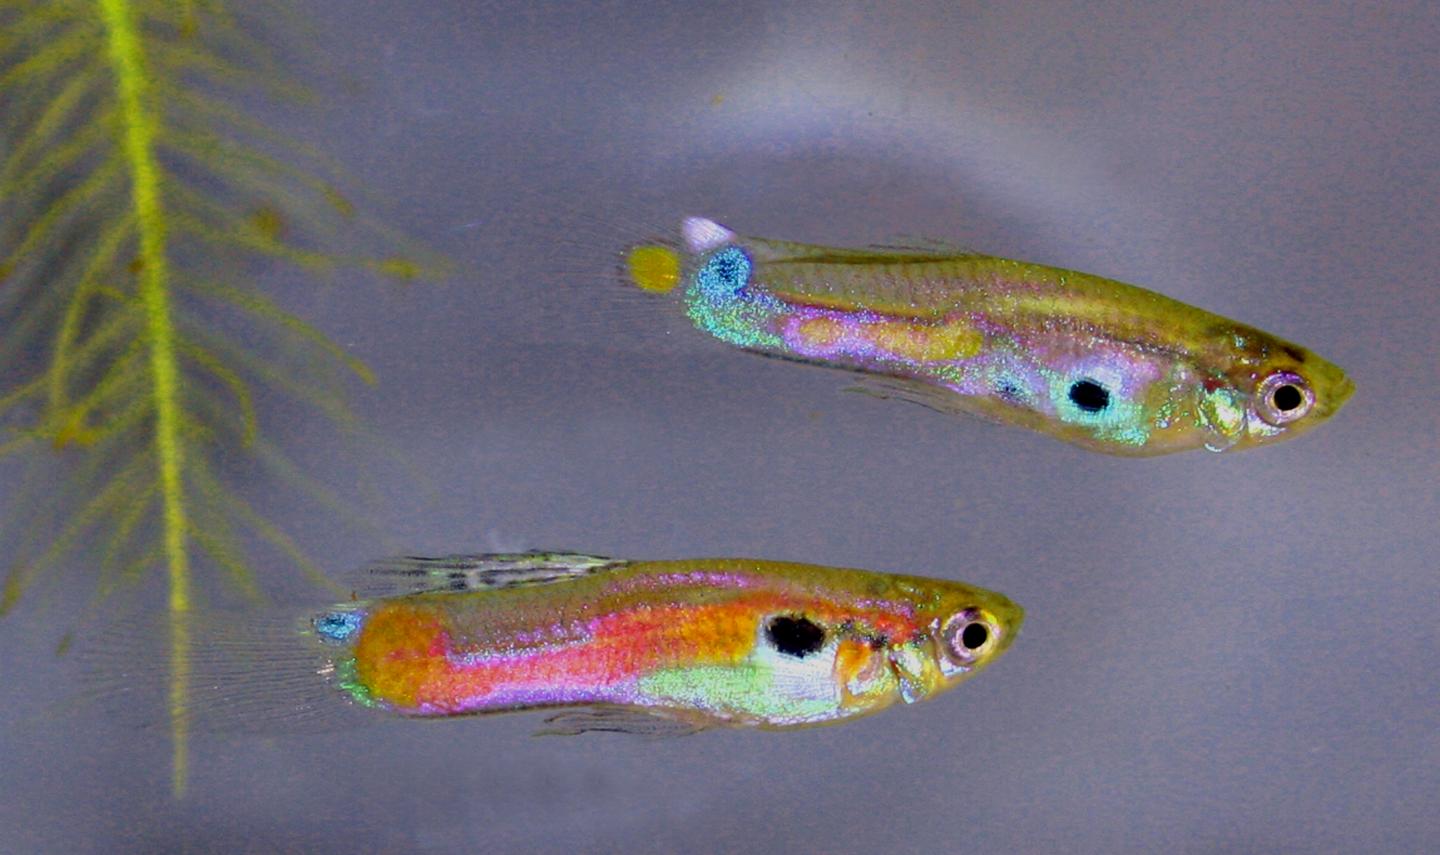 Light Pollution Makes Guppys More Courageous During the Day